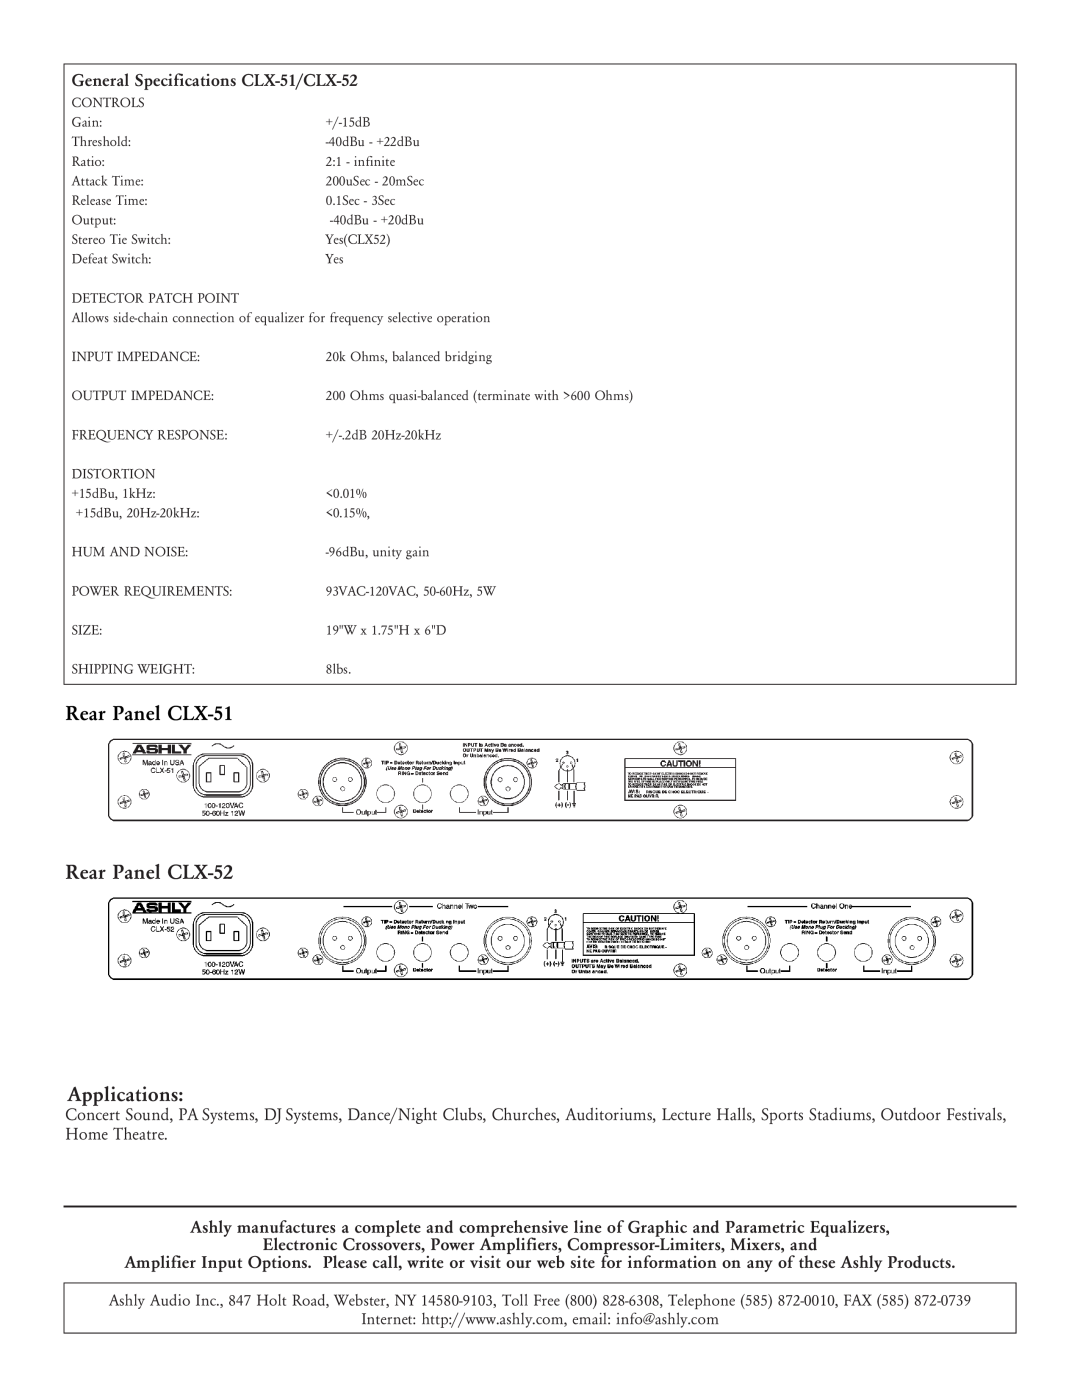 Ashly specifications Rear Panel CLX-51 Rear Panel CLX-52 Applications 